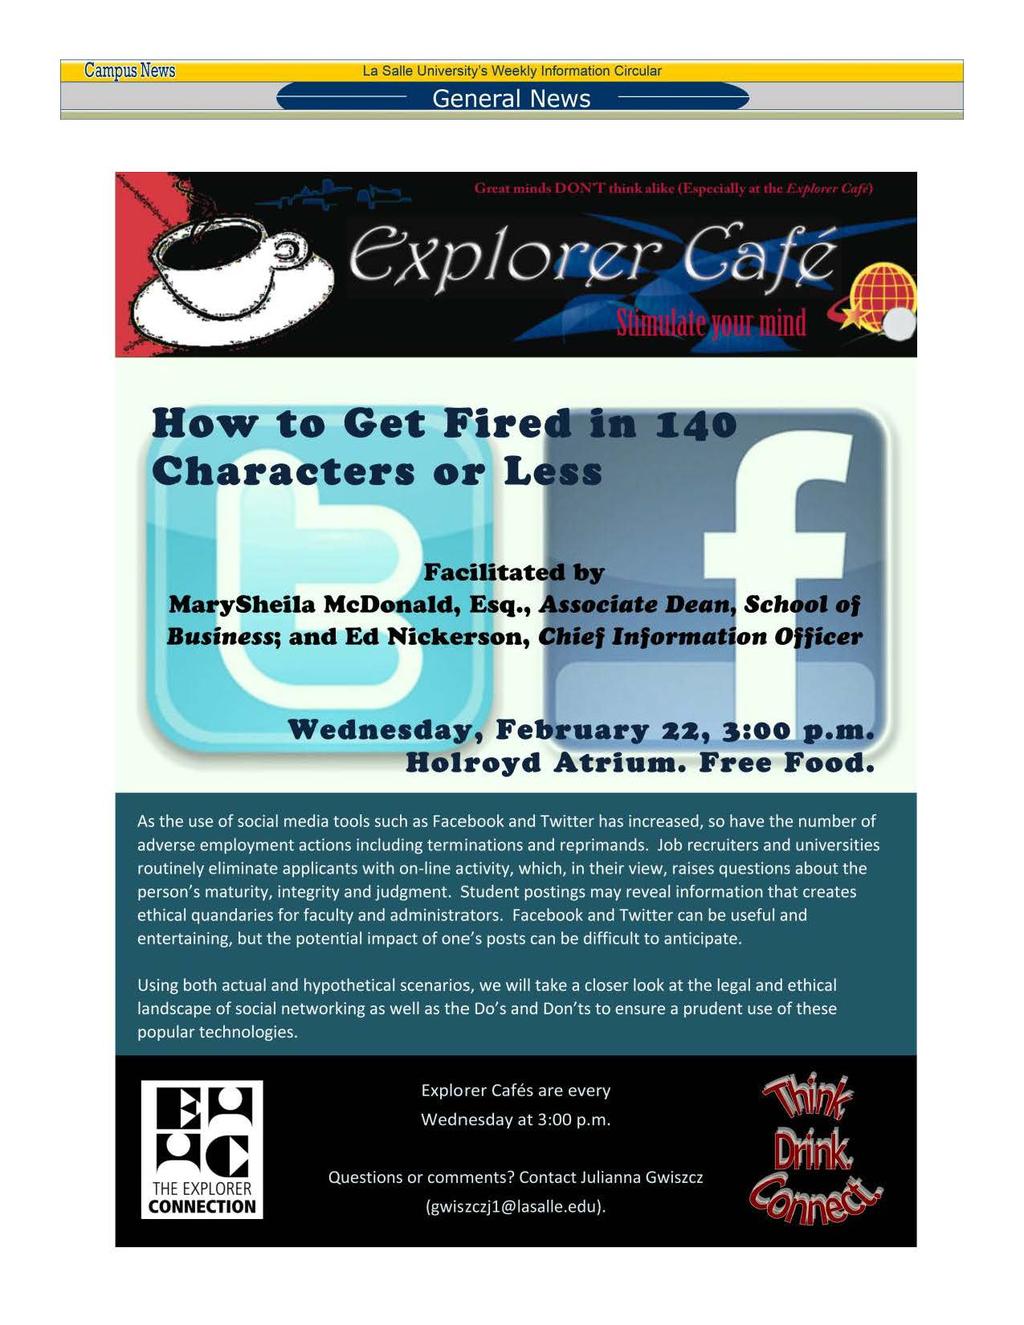 Cam usnews La Salle University's Weekly Information Circular General News Page 13 Bo~ to Get Fire Characters or L